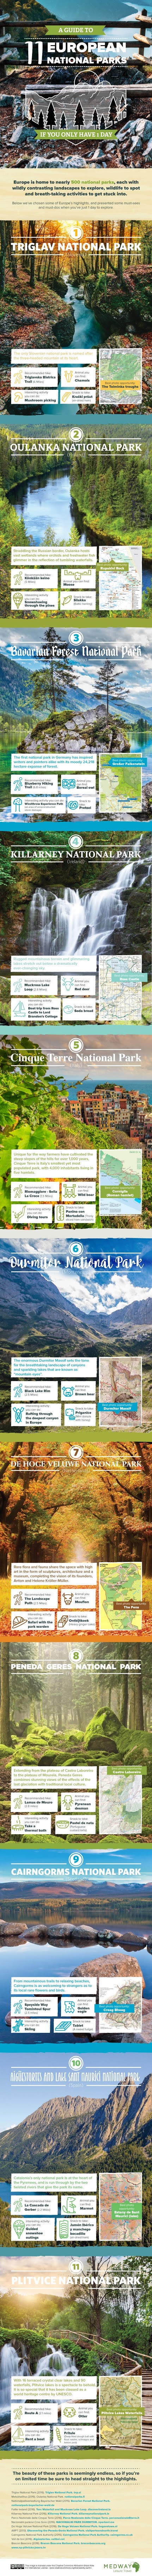 http://www.medwayleisuretravel.co.uk/images/blog/a-guide-to-12-european-national-parks-if-only-you-have-one-day/DV5---A-guide-to-X-European-national-parks-if-you-only-have-1-day-v.jpg